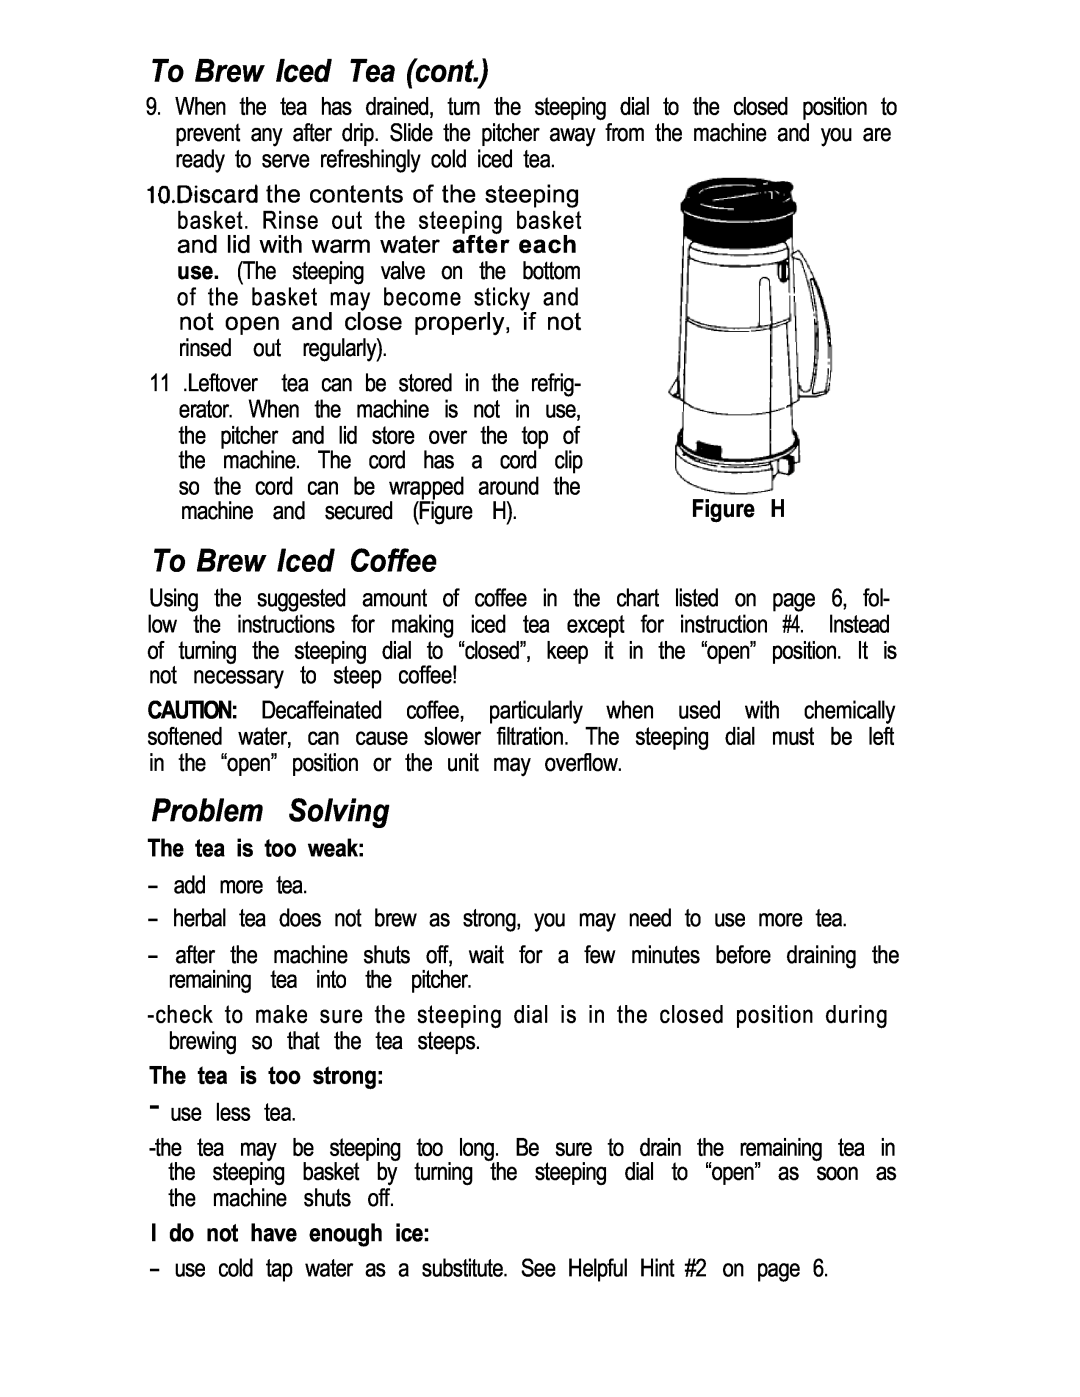 Mr. Coffee TM3 manual To Brew Iced Tea cont, To Brew Iced Coffee, Problem Solving, Figure H, The tea is too weak 